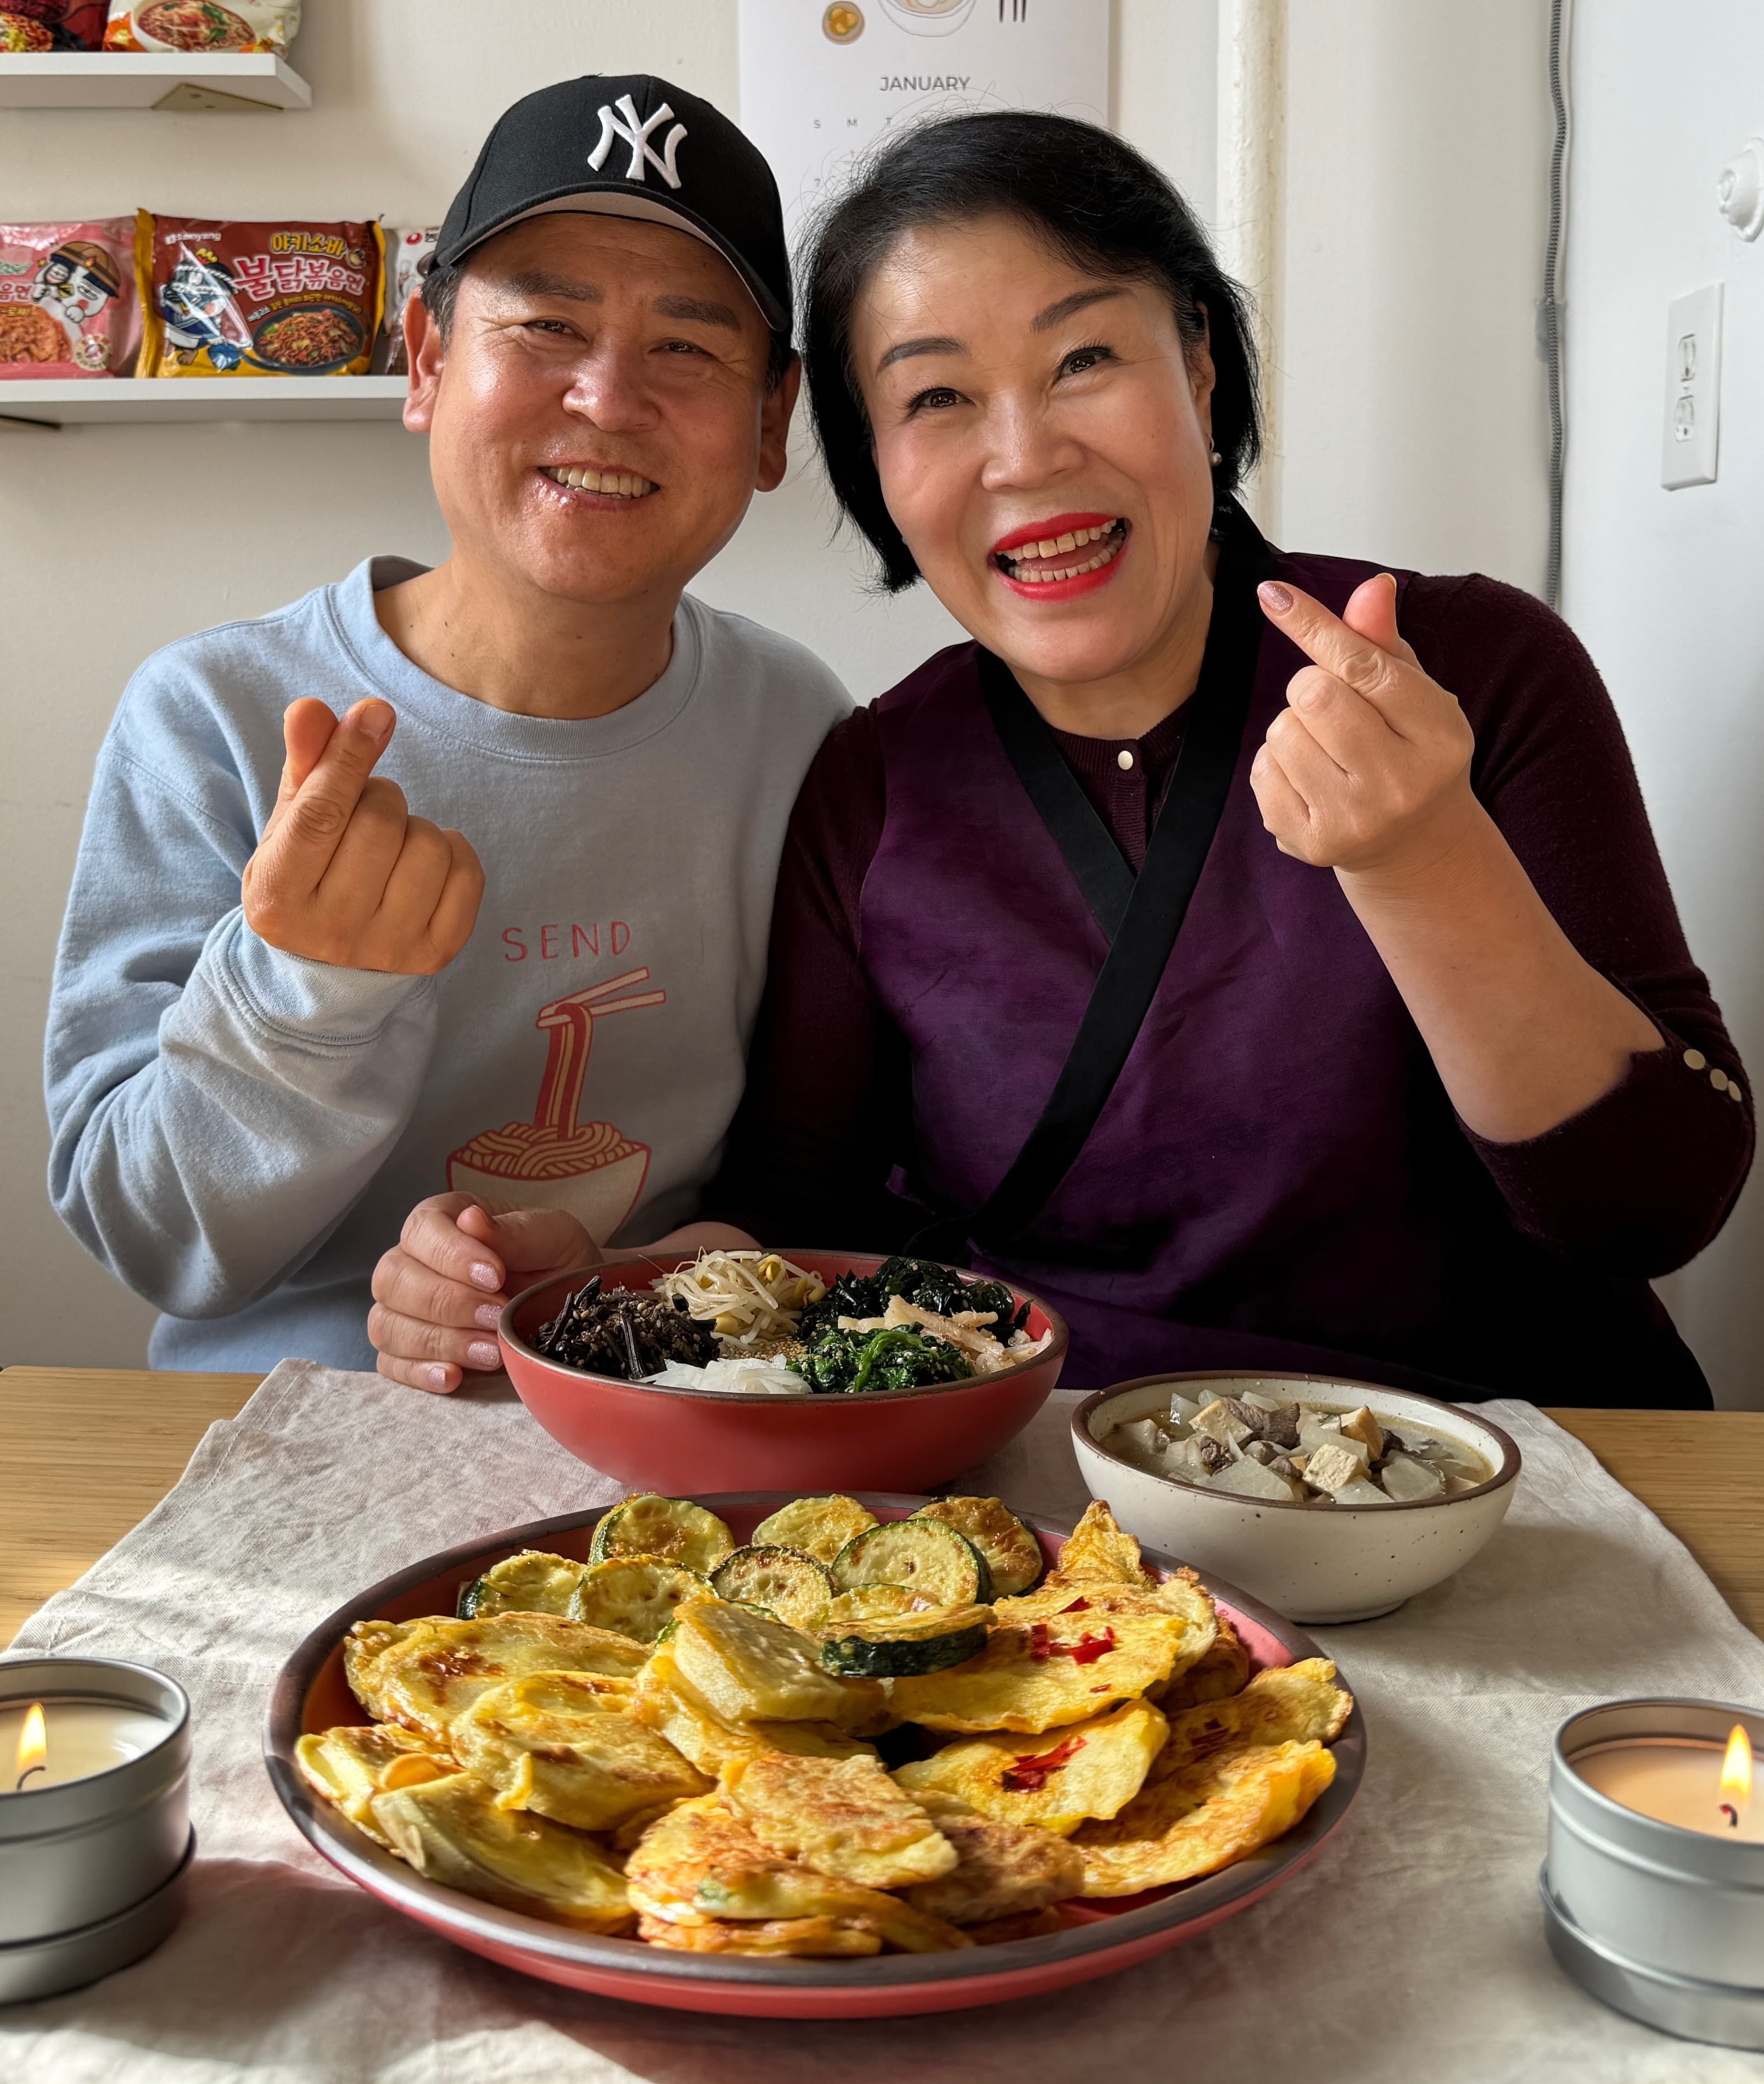 A mom and dad are smiling at the camera behind a table filled with Korean Lunar New Year foods plated on ceramic plates and bowls.